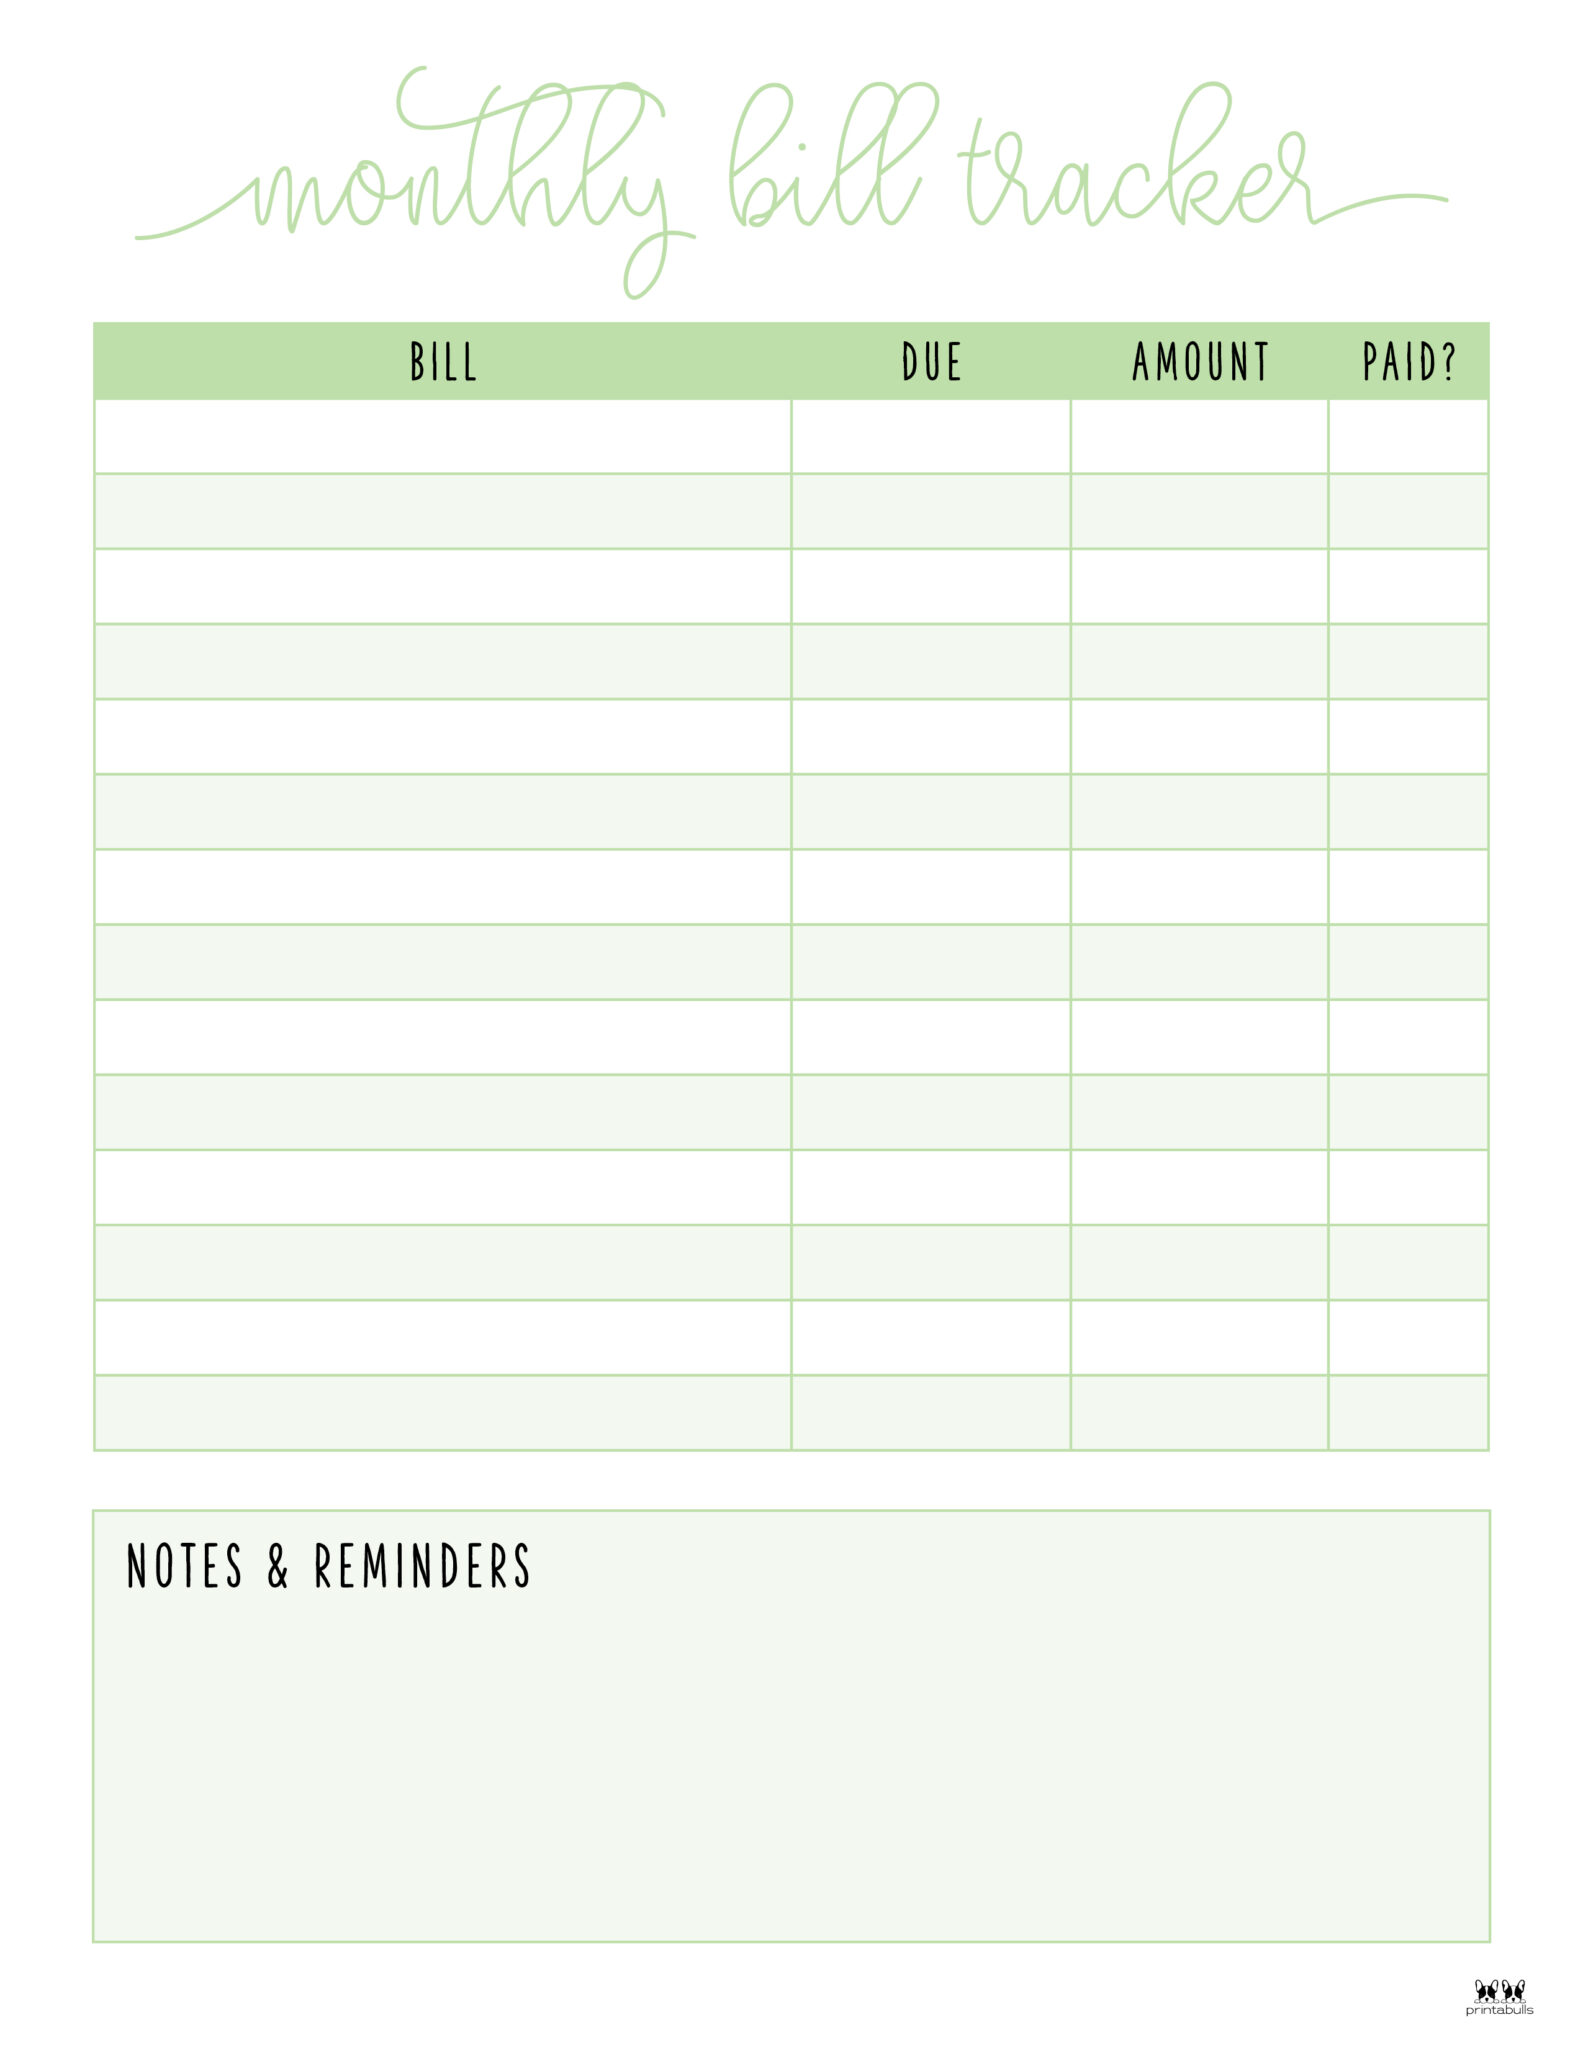 Printable Monthly Bill Organizer Once In The Pdf, You Should Be Able To